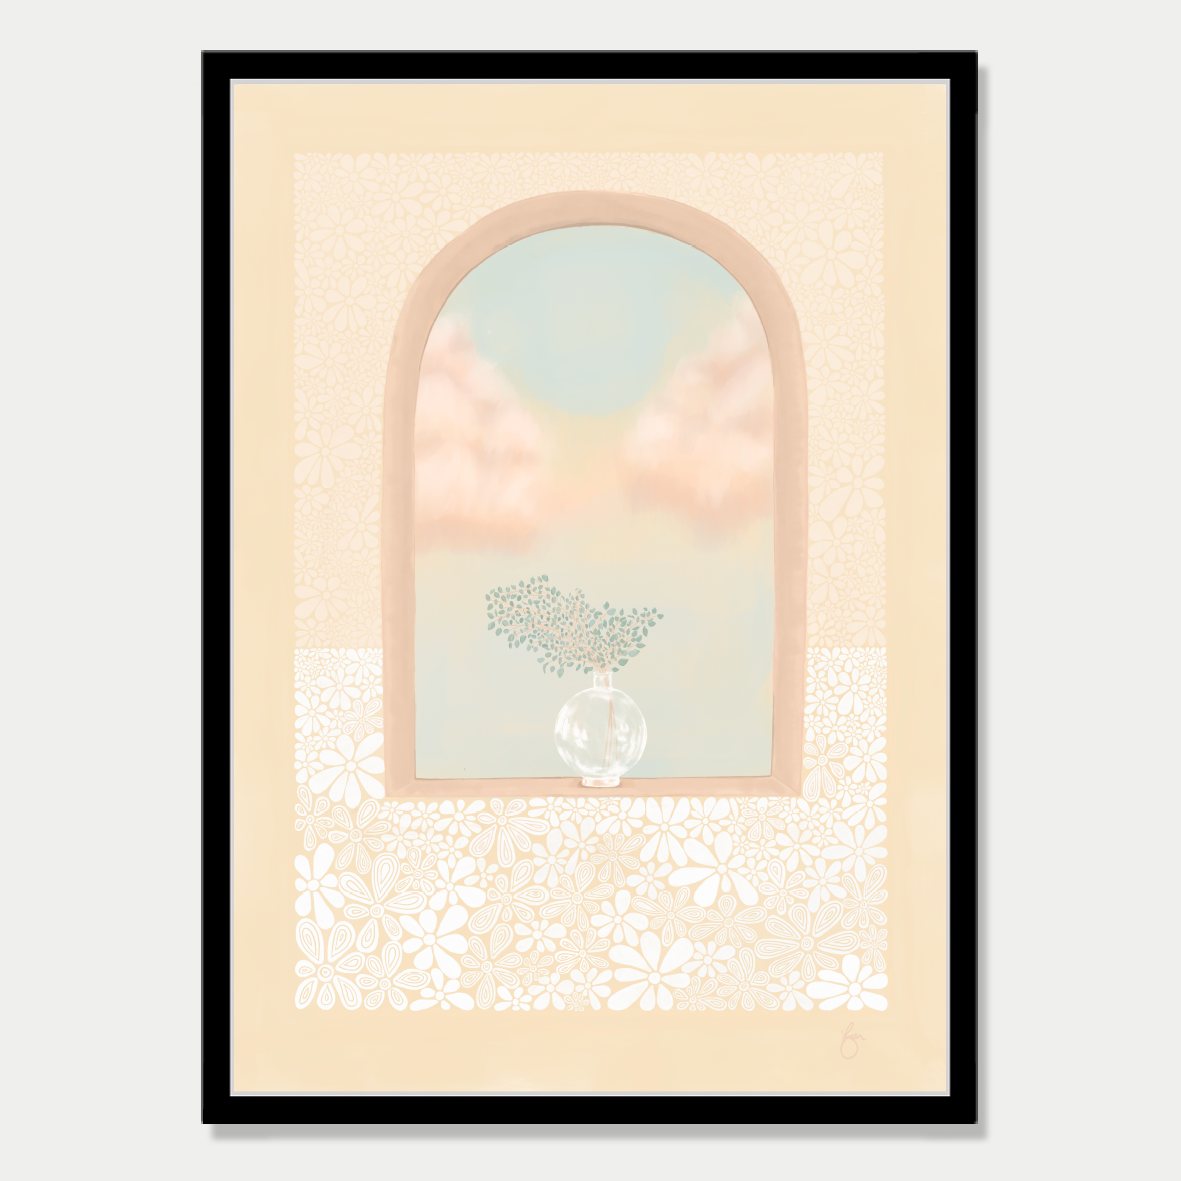 Art print of an arched window with a plant sitting in it and a view of fluffy clouds, in a pastel yellow and peach colour palette, by Bon Jung. Printed in New Zealand by endemicworld and framed in black.